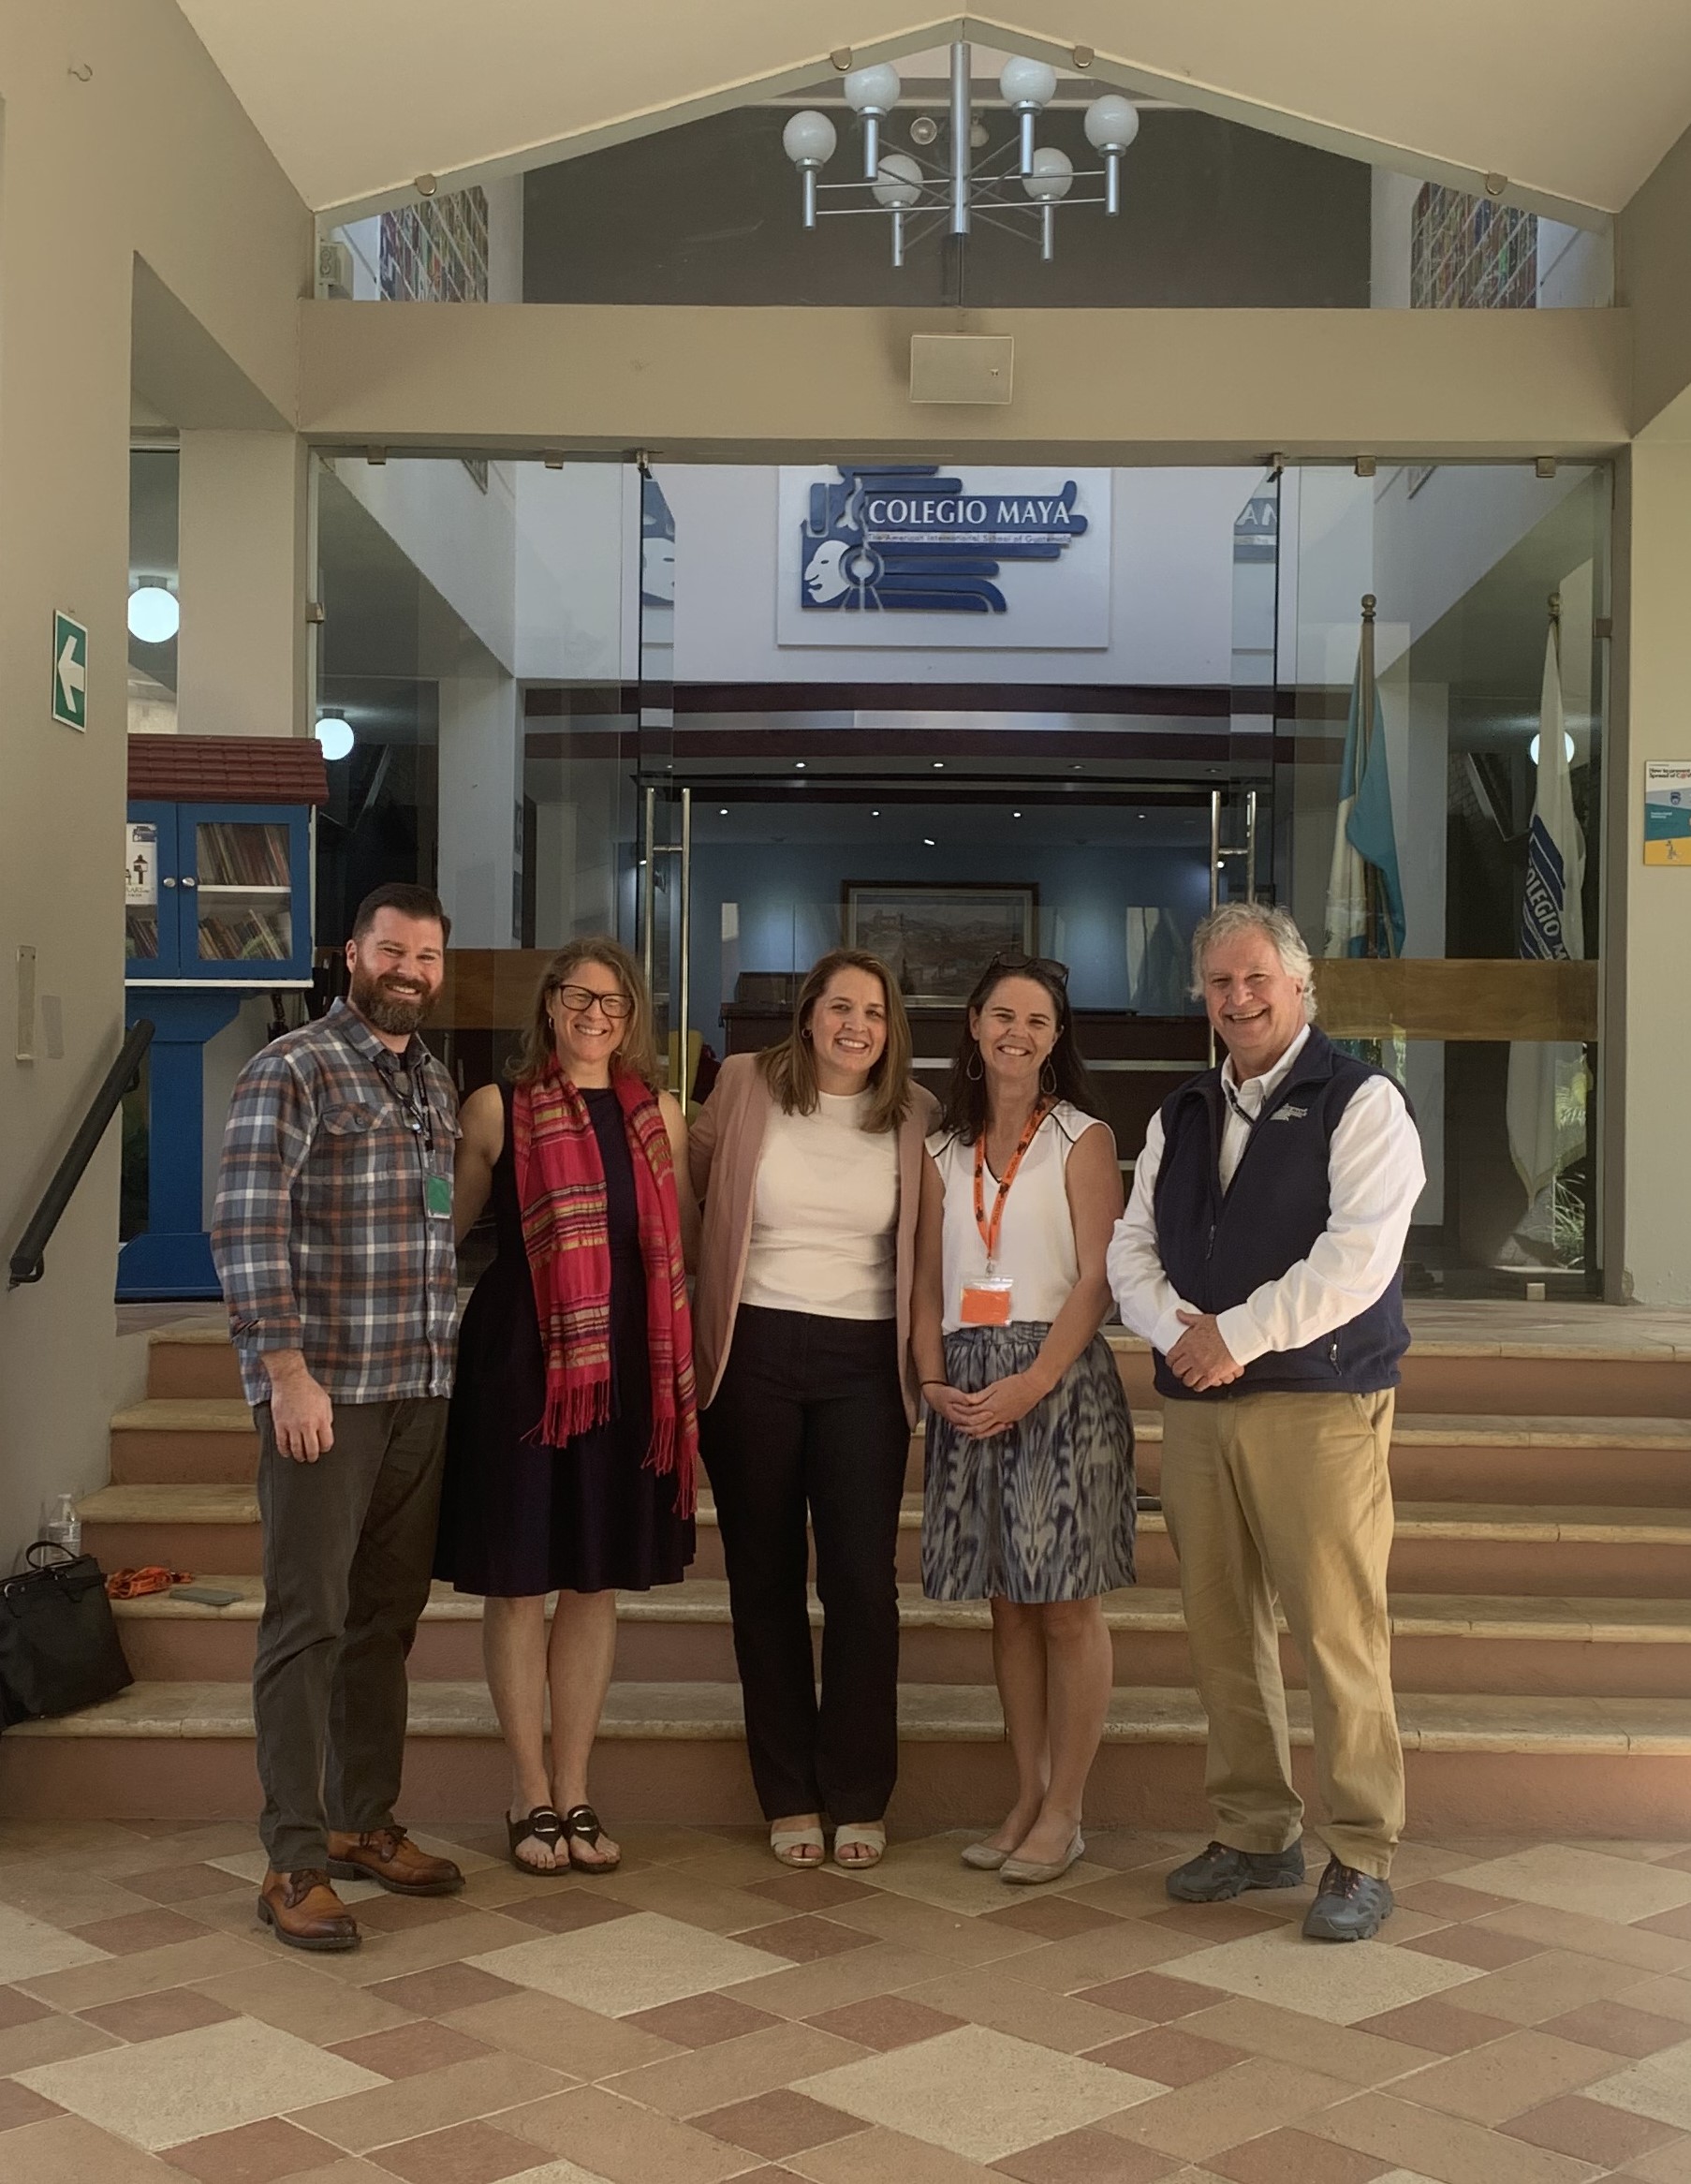 L to R: Chris Muller (Colegio Maya Secondary Principal), Courtney Bell, Samantha Olson-Wyman (current CAG Curriculum, Teaching and Learning Specialist and incoming Colegio Maya Elementary Principal), Esther Bettney Heidt & Jeff Fifield (Curriculum Director).